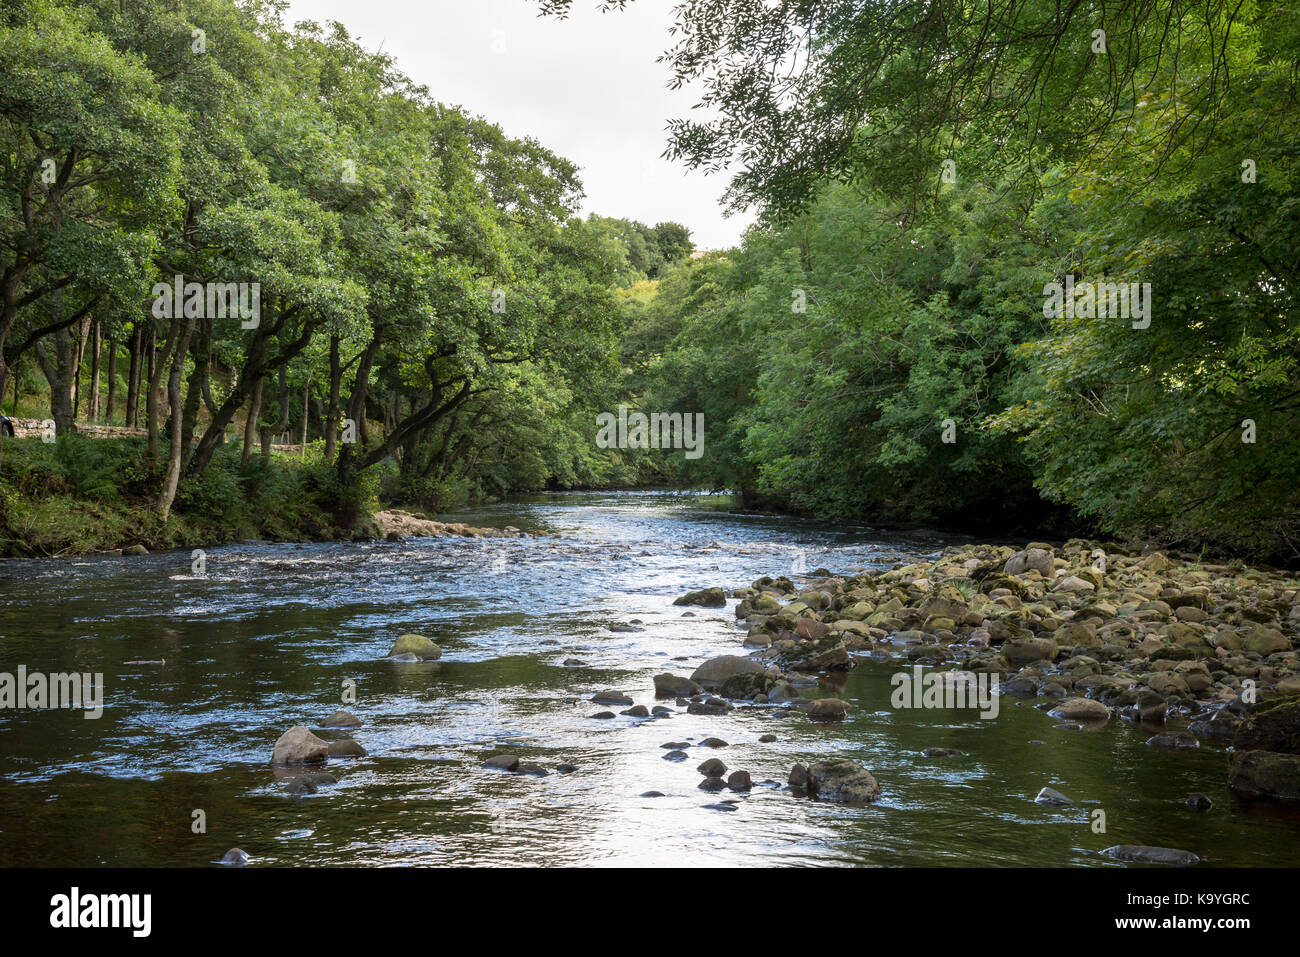 Il fiume swale vicino gunnerside in swaledale, Yorkshire Dales, Inghilterra Foto Stock